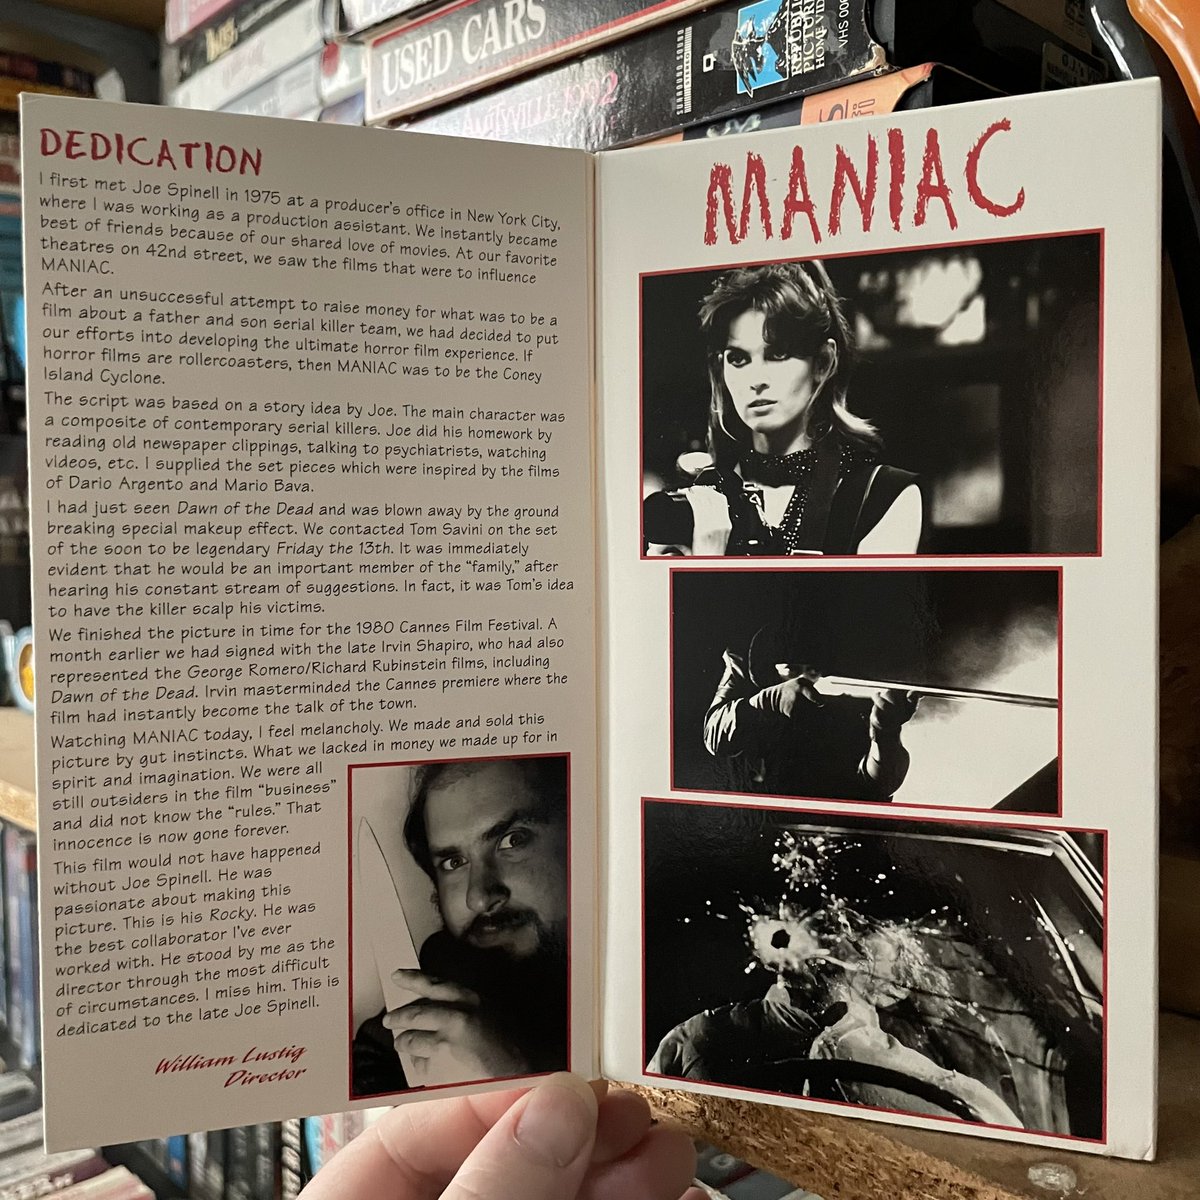 “I told you not to go out tonight, didn't I? Every time you go out, this kind of thing happens”
#maniac #1980movie #80scinema #80shorror #80sslasher #williamlustig #joespinell #tomsavini #carolinemunro #kellypiper #vhs #vhscover #vhscollector #vhscollection #vhsforever #vhstape